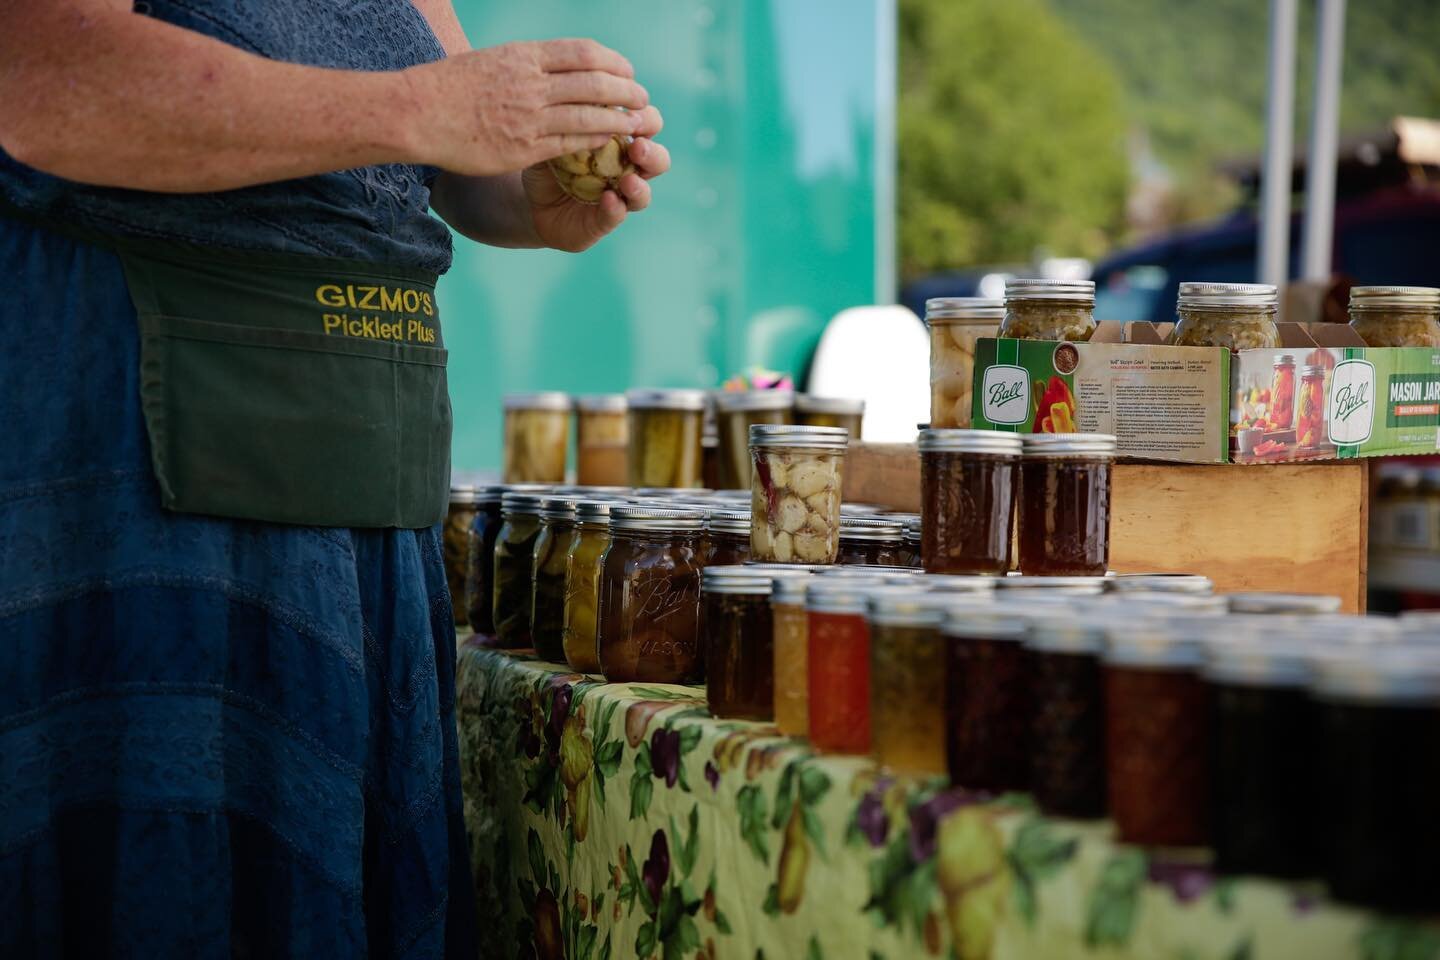 Gizmo's Pickled PLUS has over 44 different kinds of homemade jams, jellies, pickles and relishes made right here in Vermont. They also sell pies and quiches, including gluten-free versions, at many of their markets. They also take special orders. If 